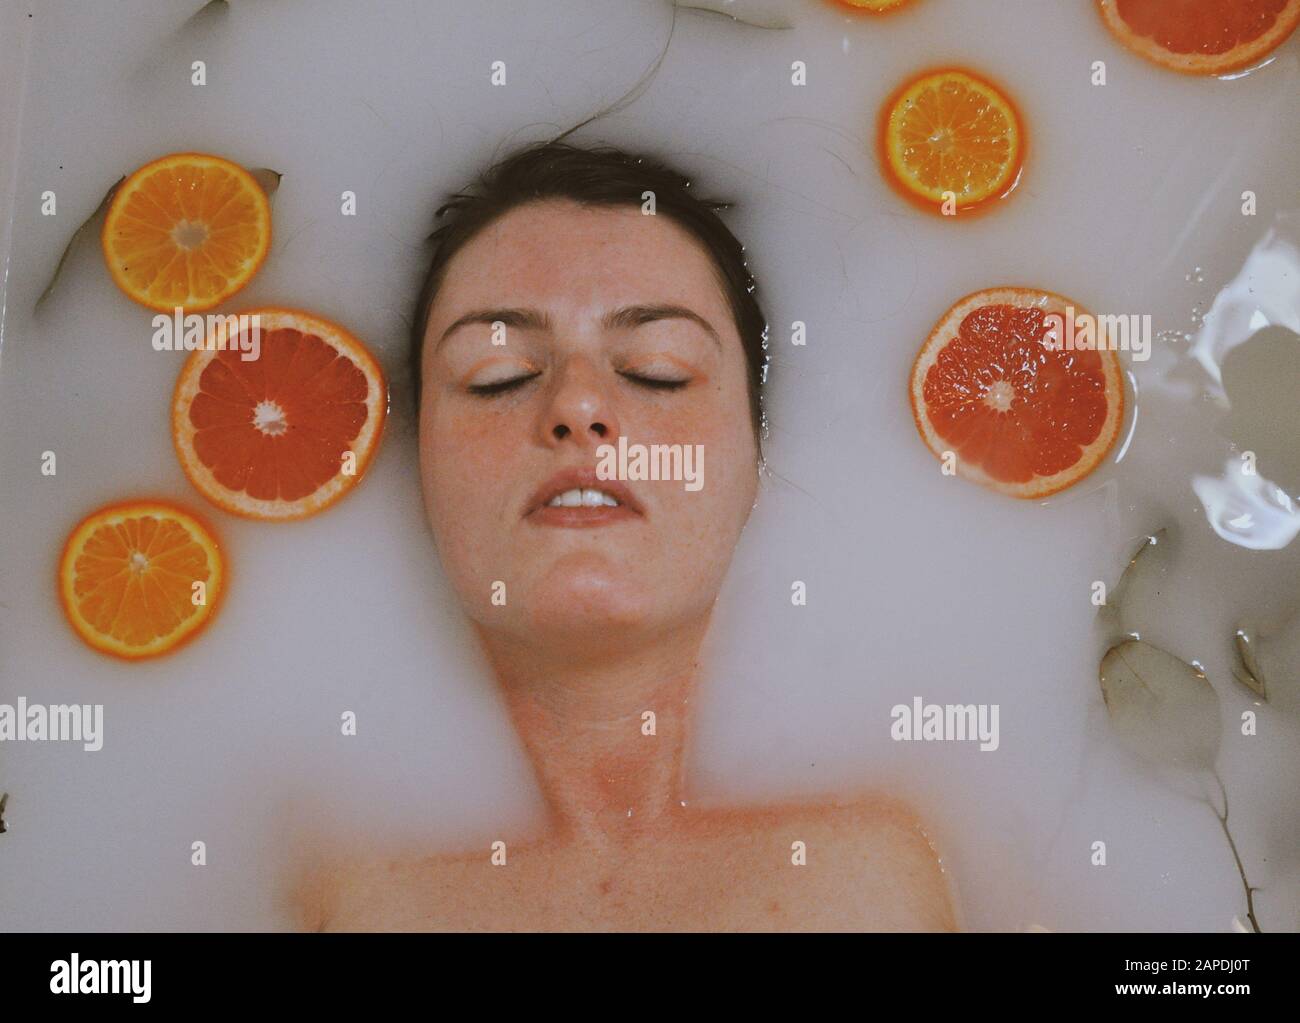 Floating in a Milk Bath Stock Photo